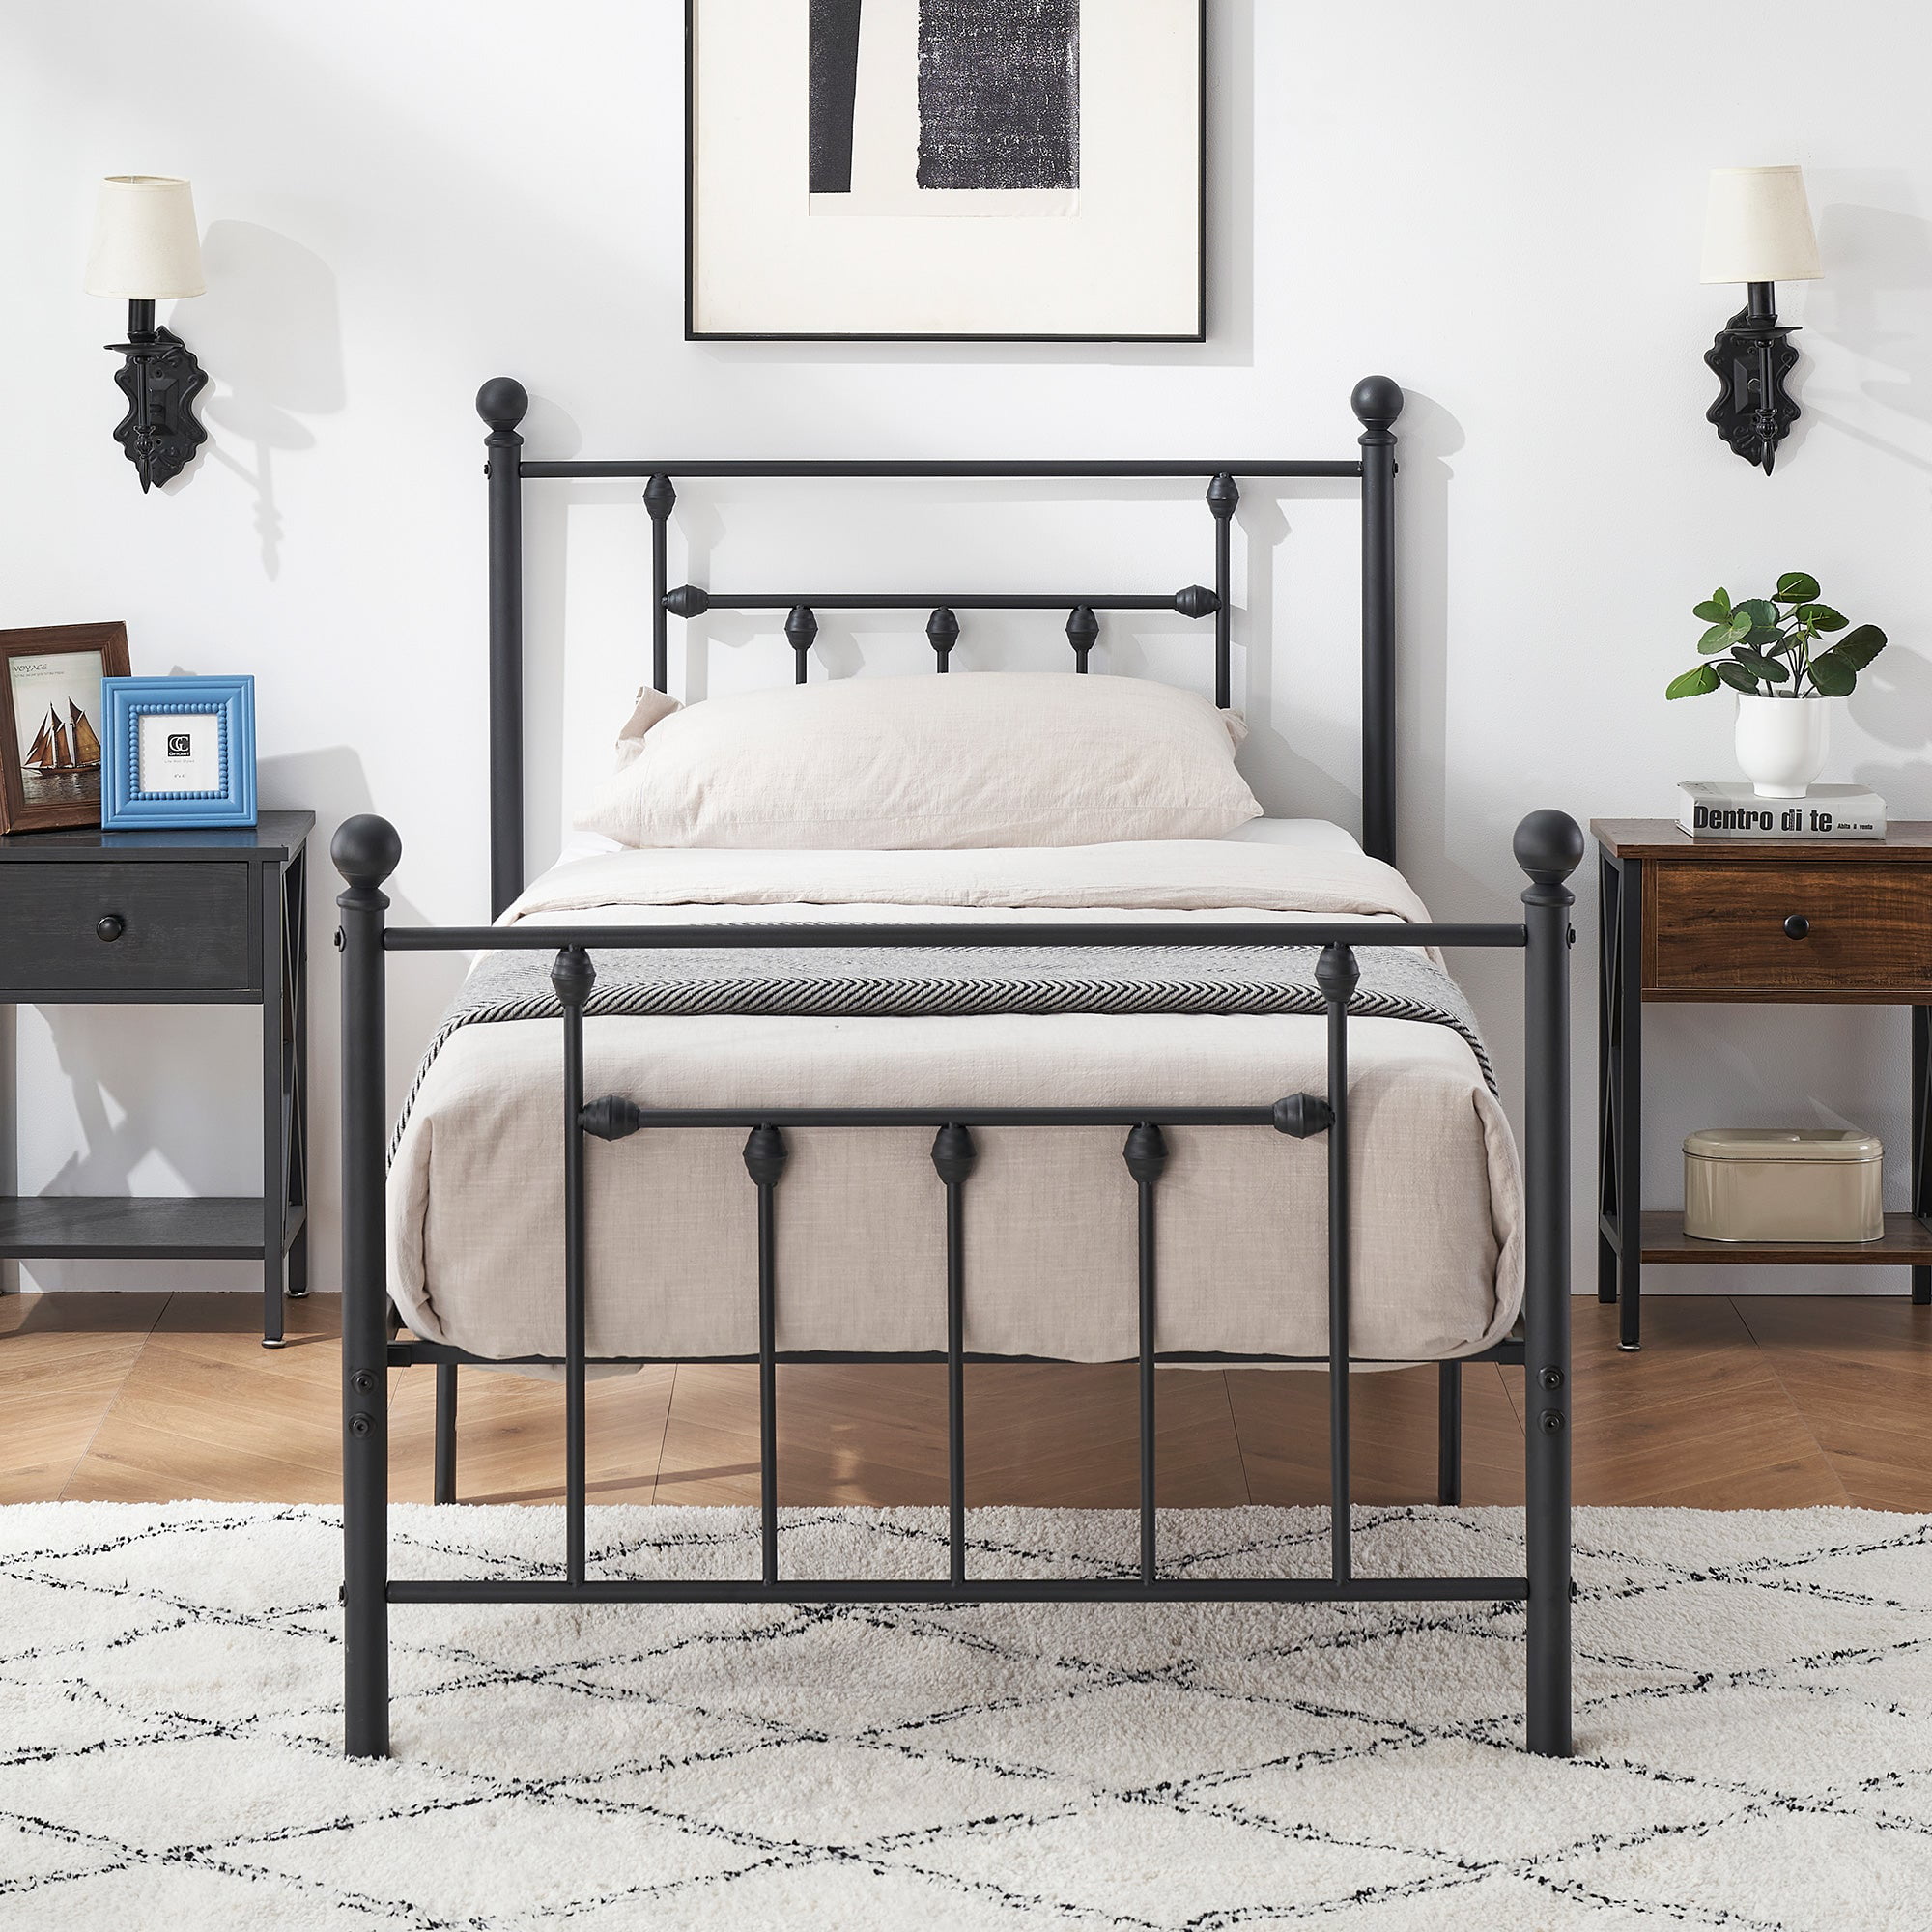 Details about   Twin Full Queen Metal Bed Frame Platform w/ Wooden Headboard/Footboard Mahogany 